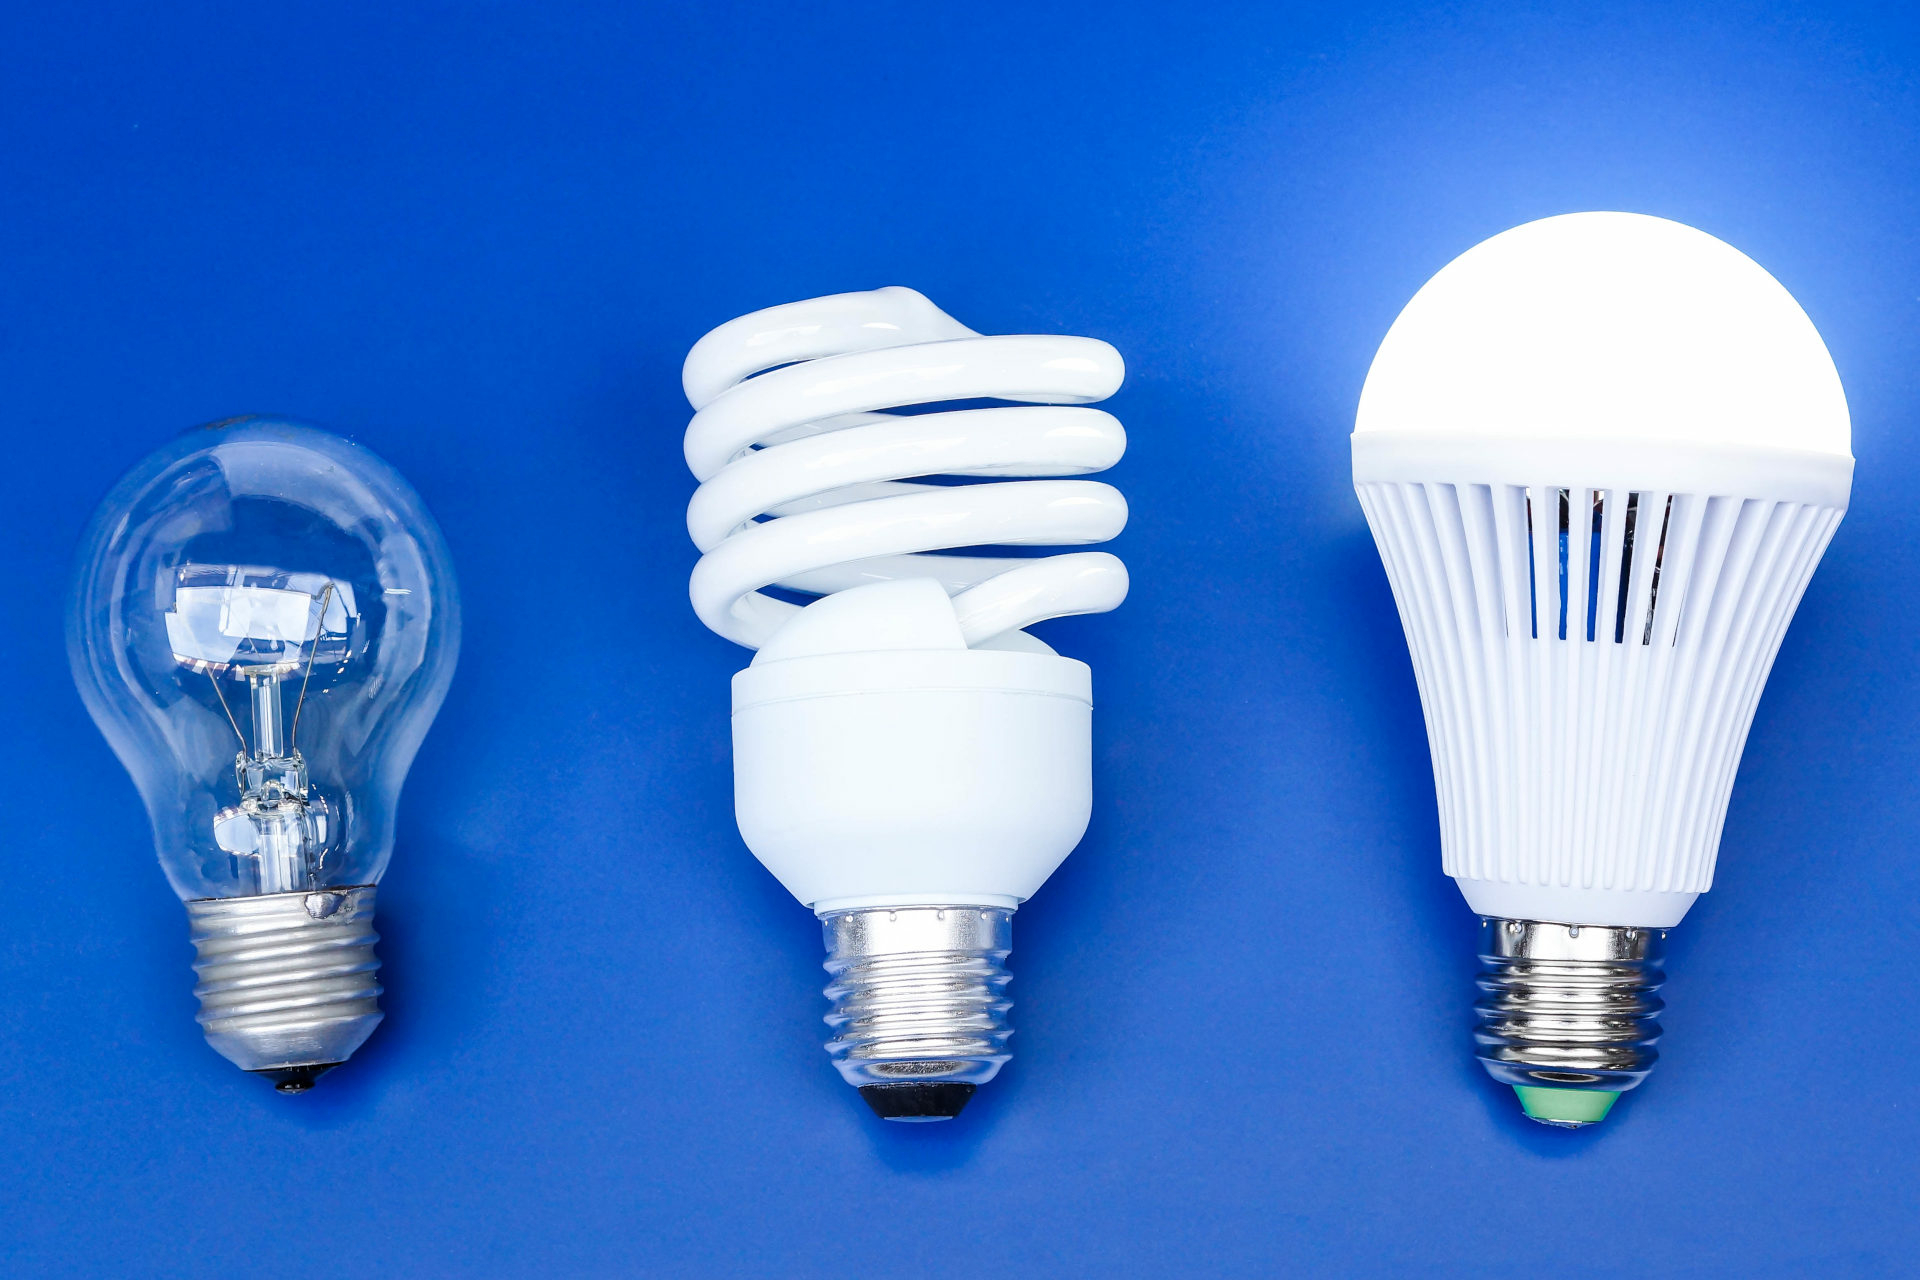 What Is The Most Energy Efficient Light Bulb? - LampHQ